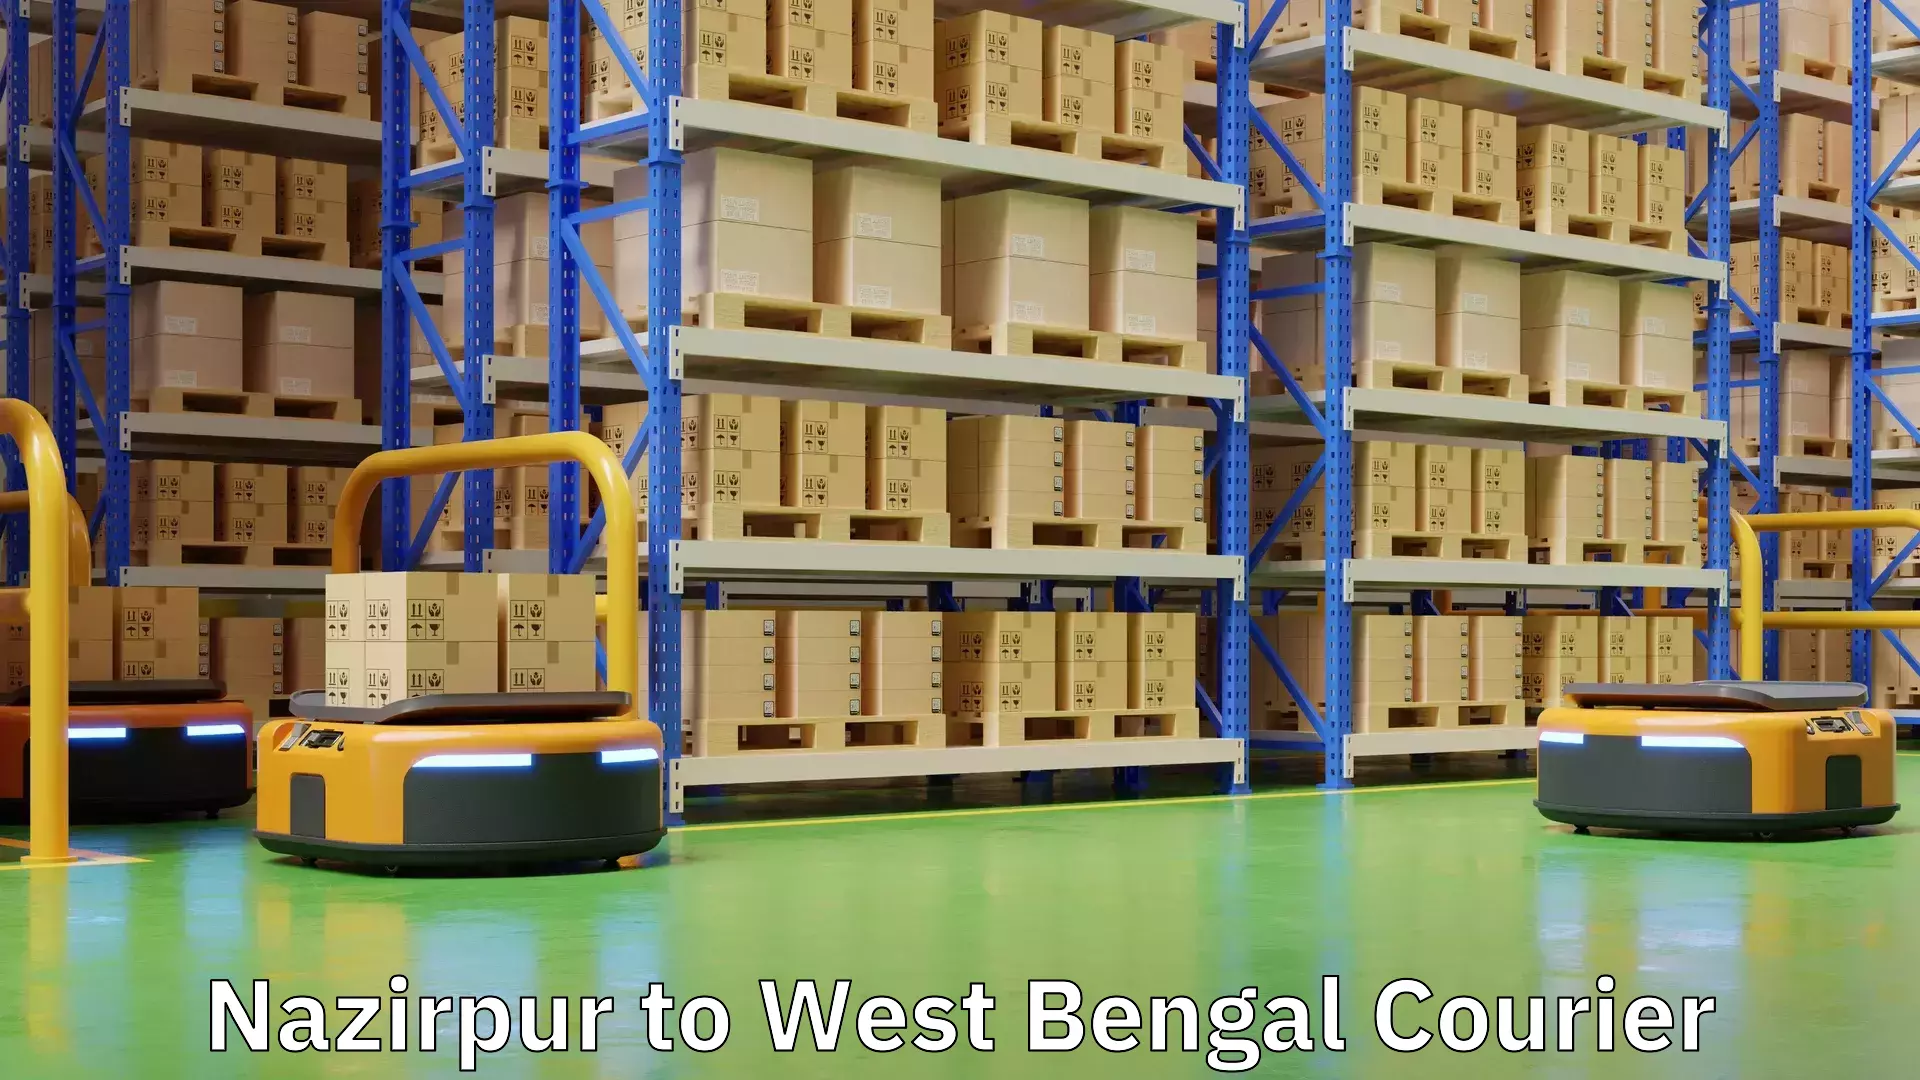 Supply chain efficiency in Nazirpur to West Bengal